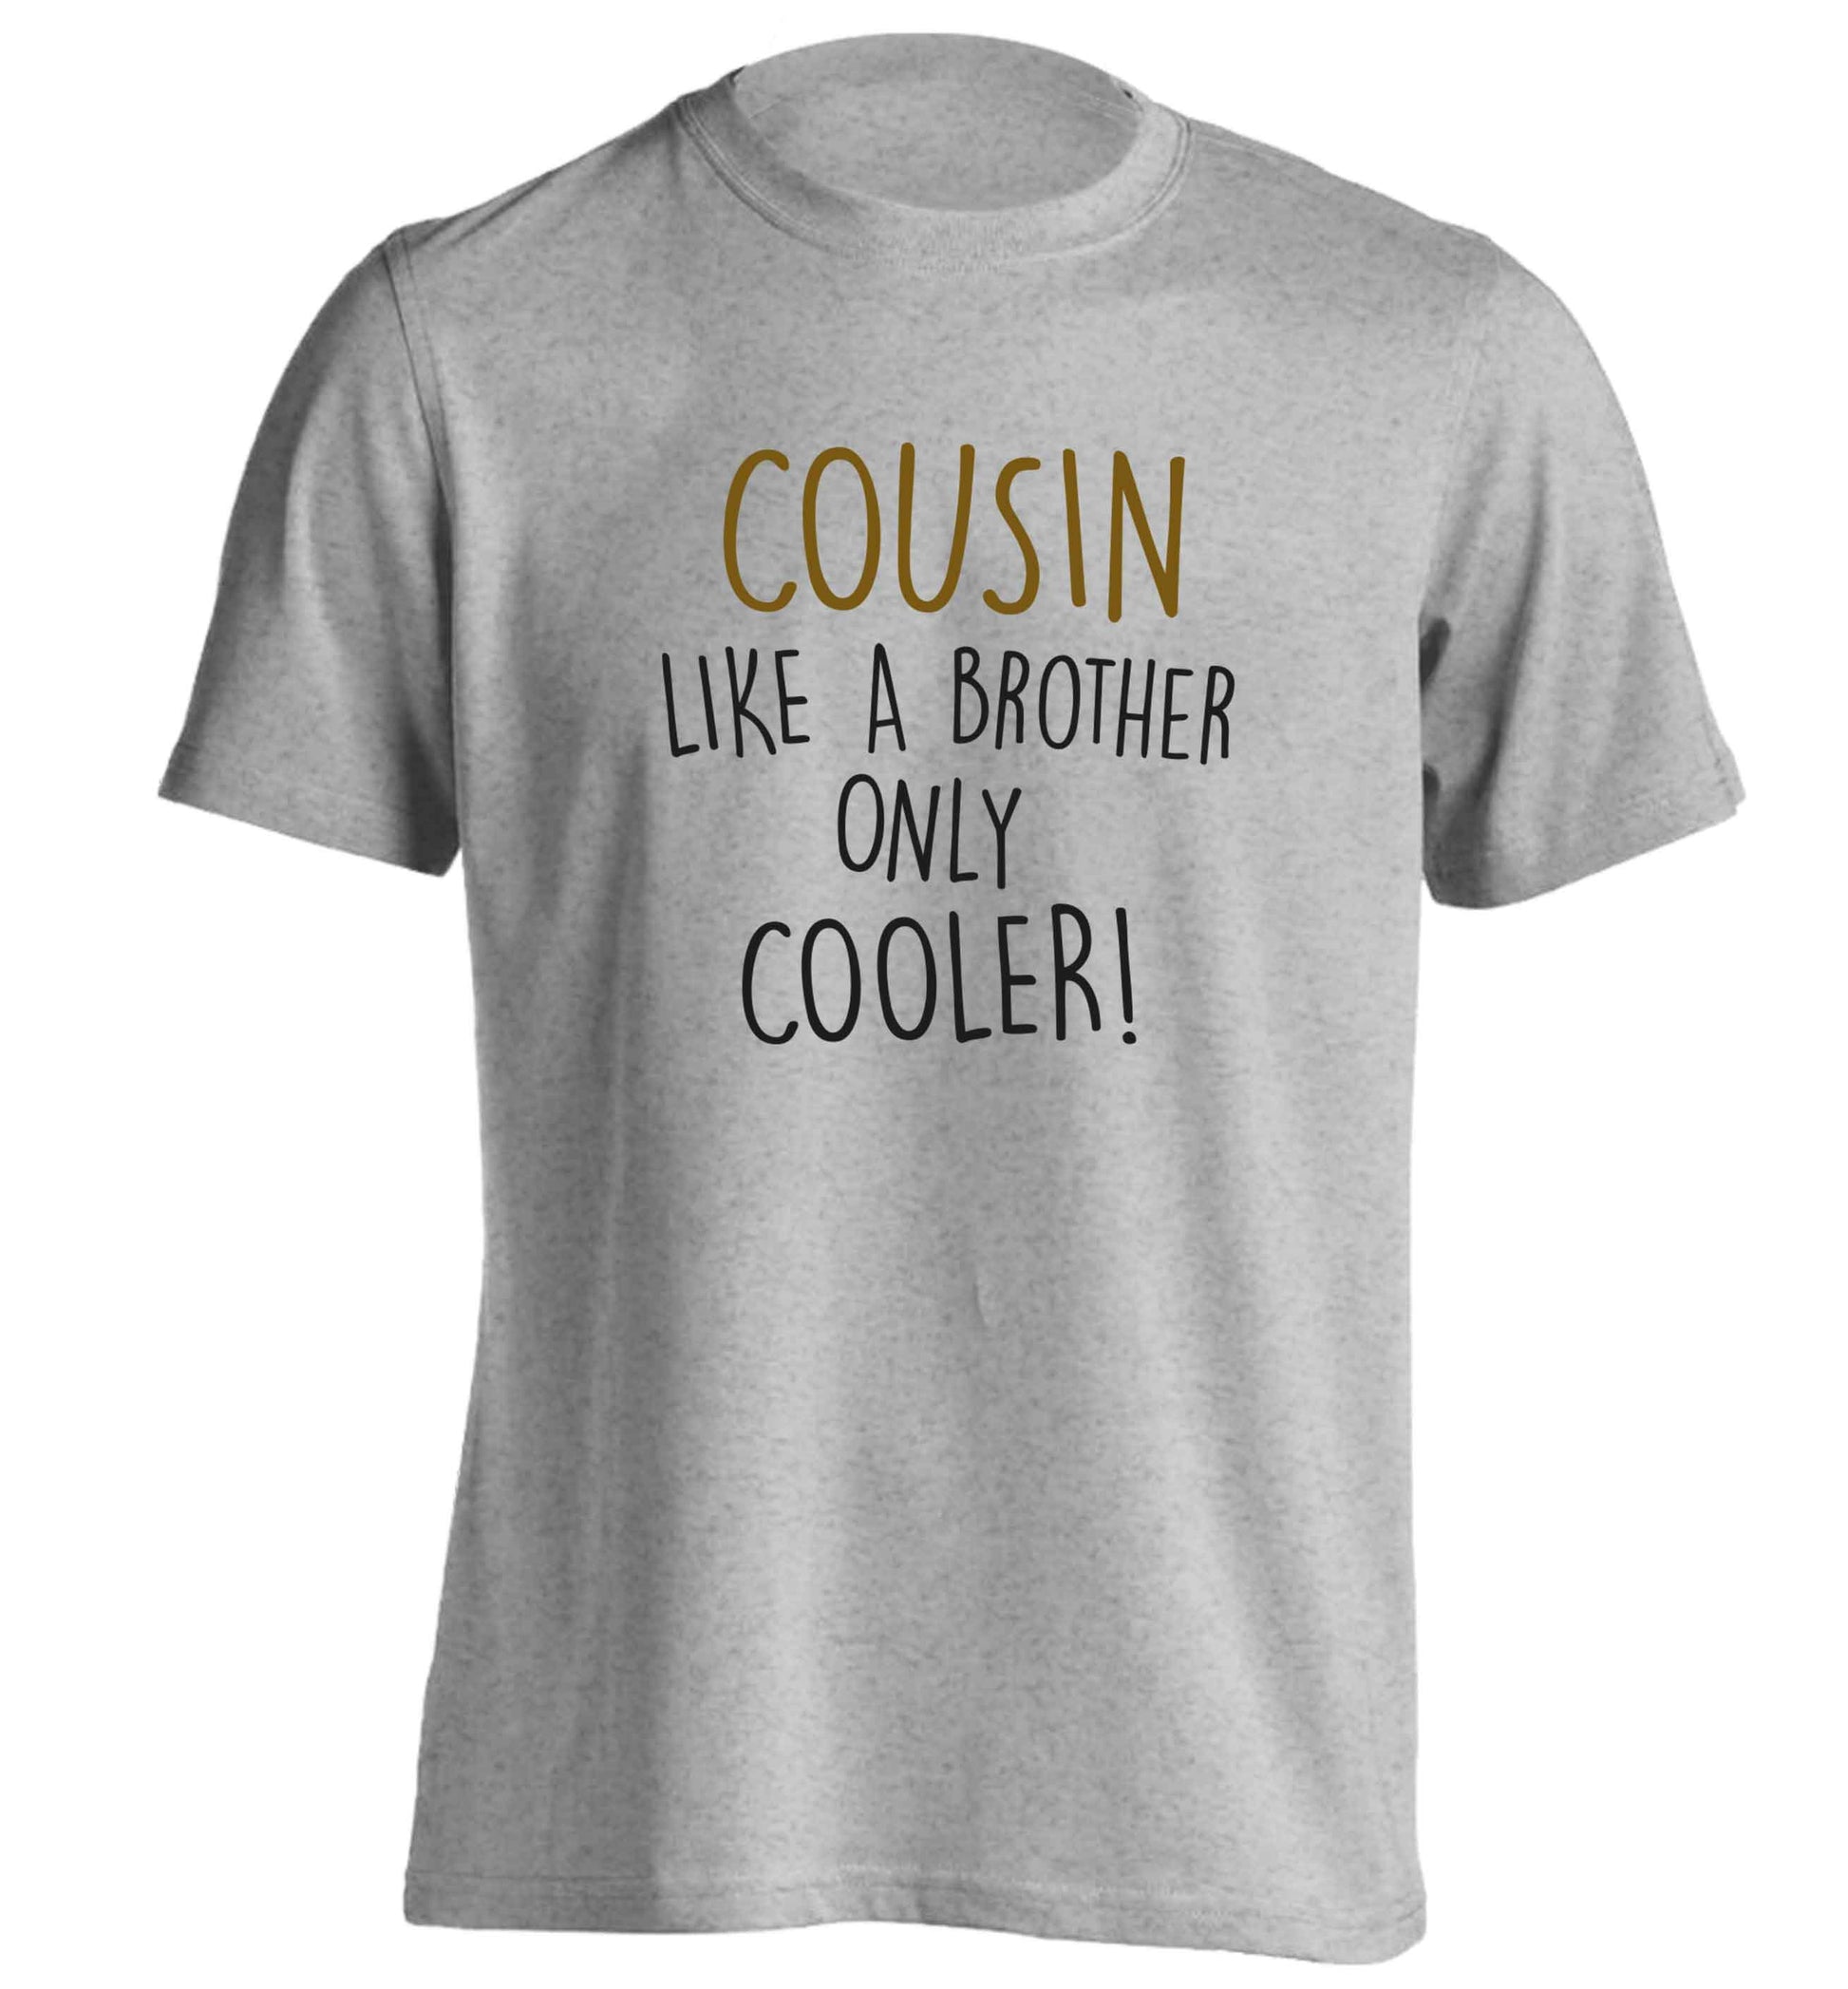 Cousin like a brother only cooler adults unisex grey Tshirt 2XL